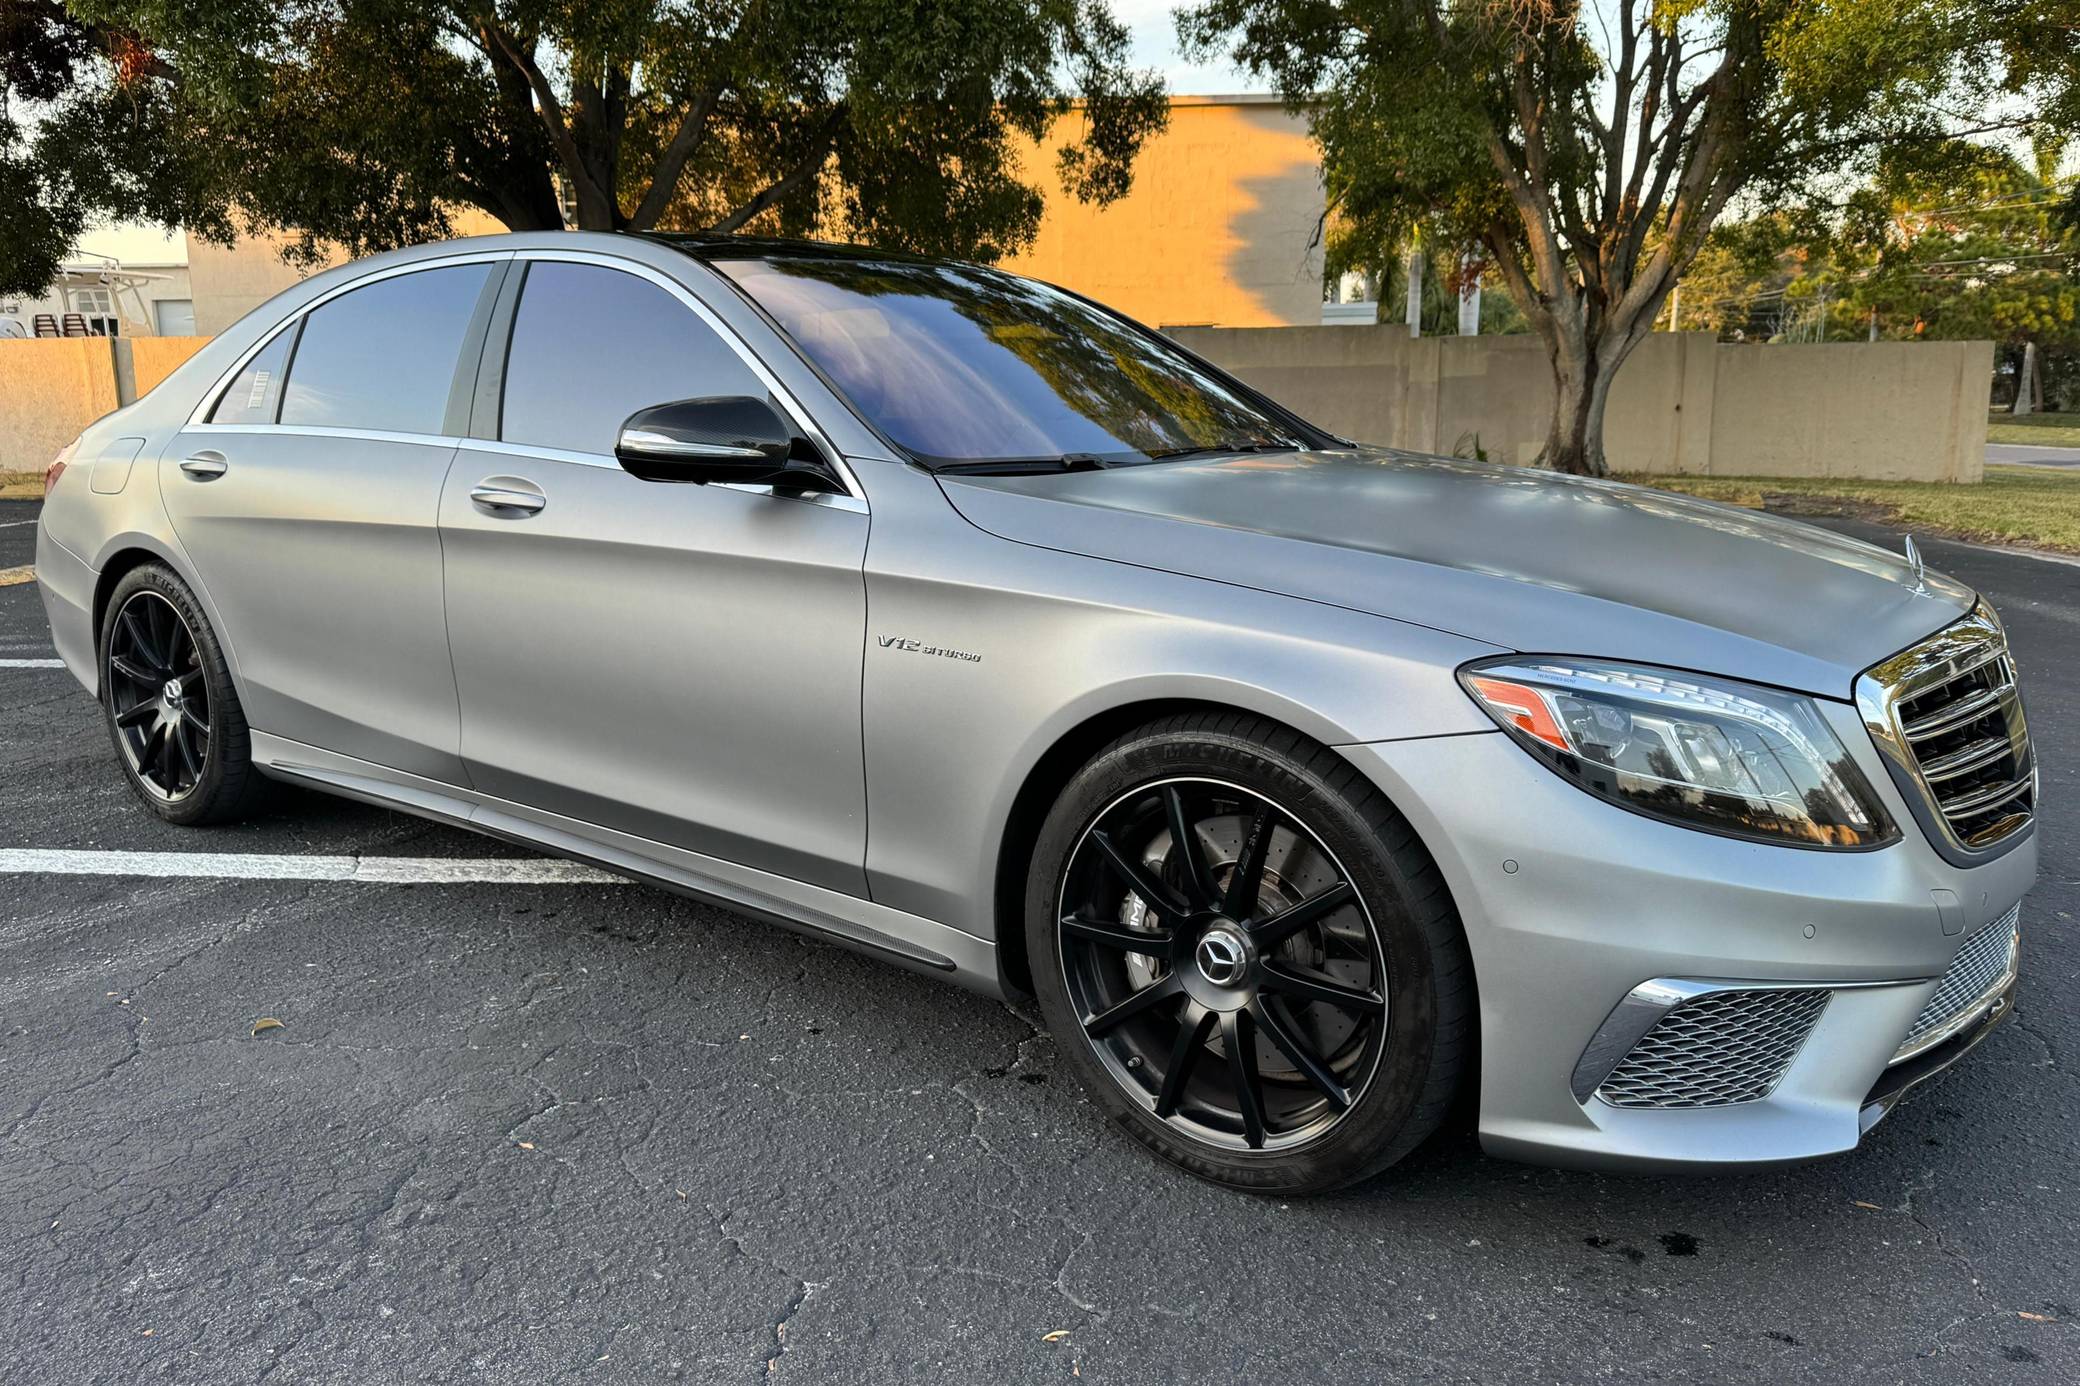 Used 2016 Mercedes-Benz S65 AMG Coupe For Sale (Sold)